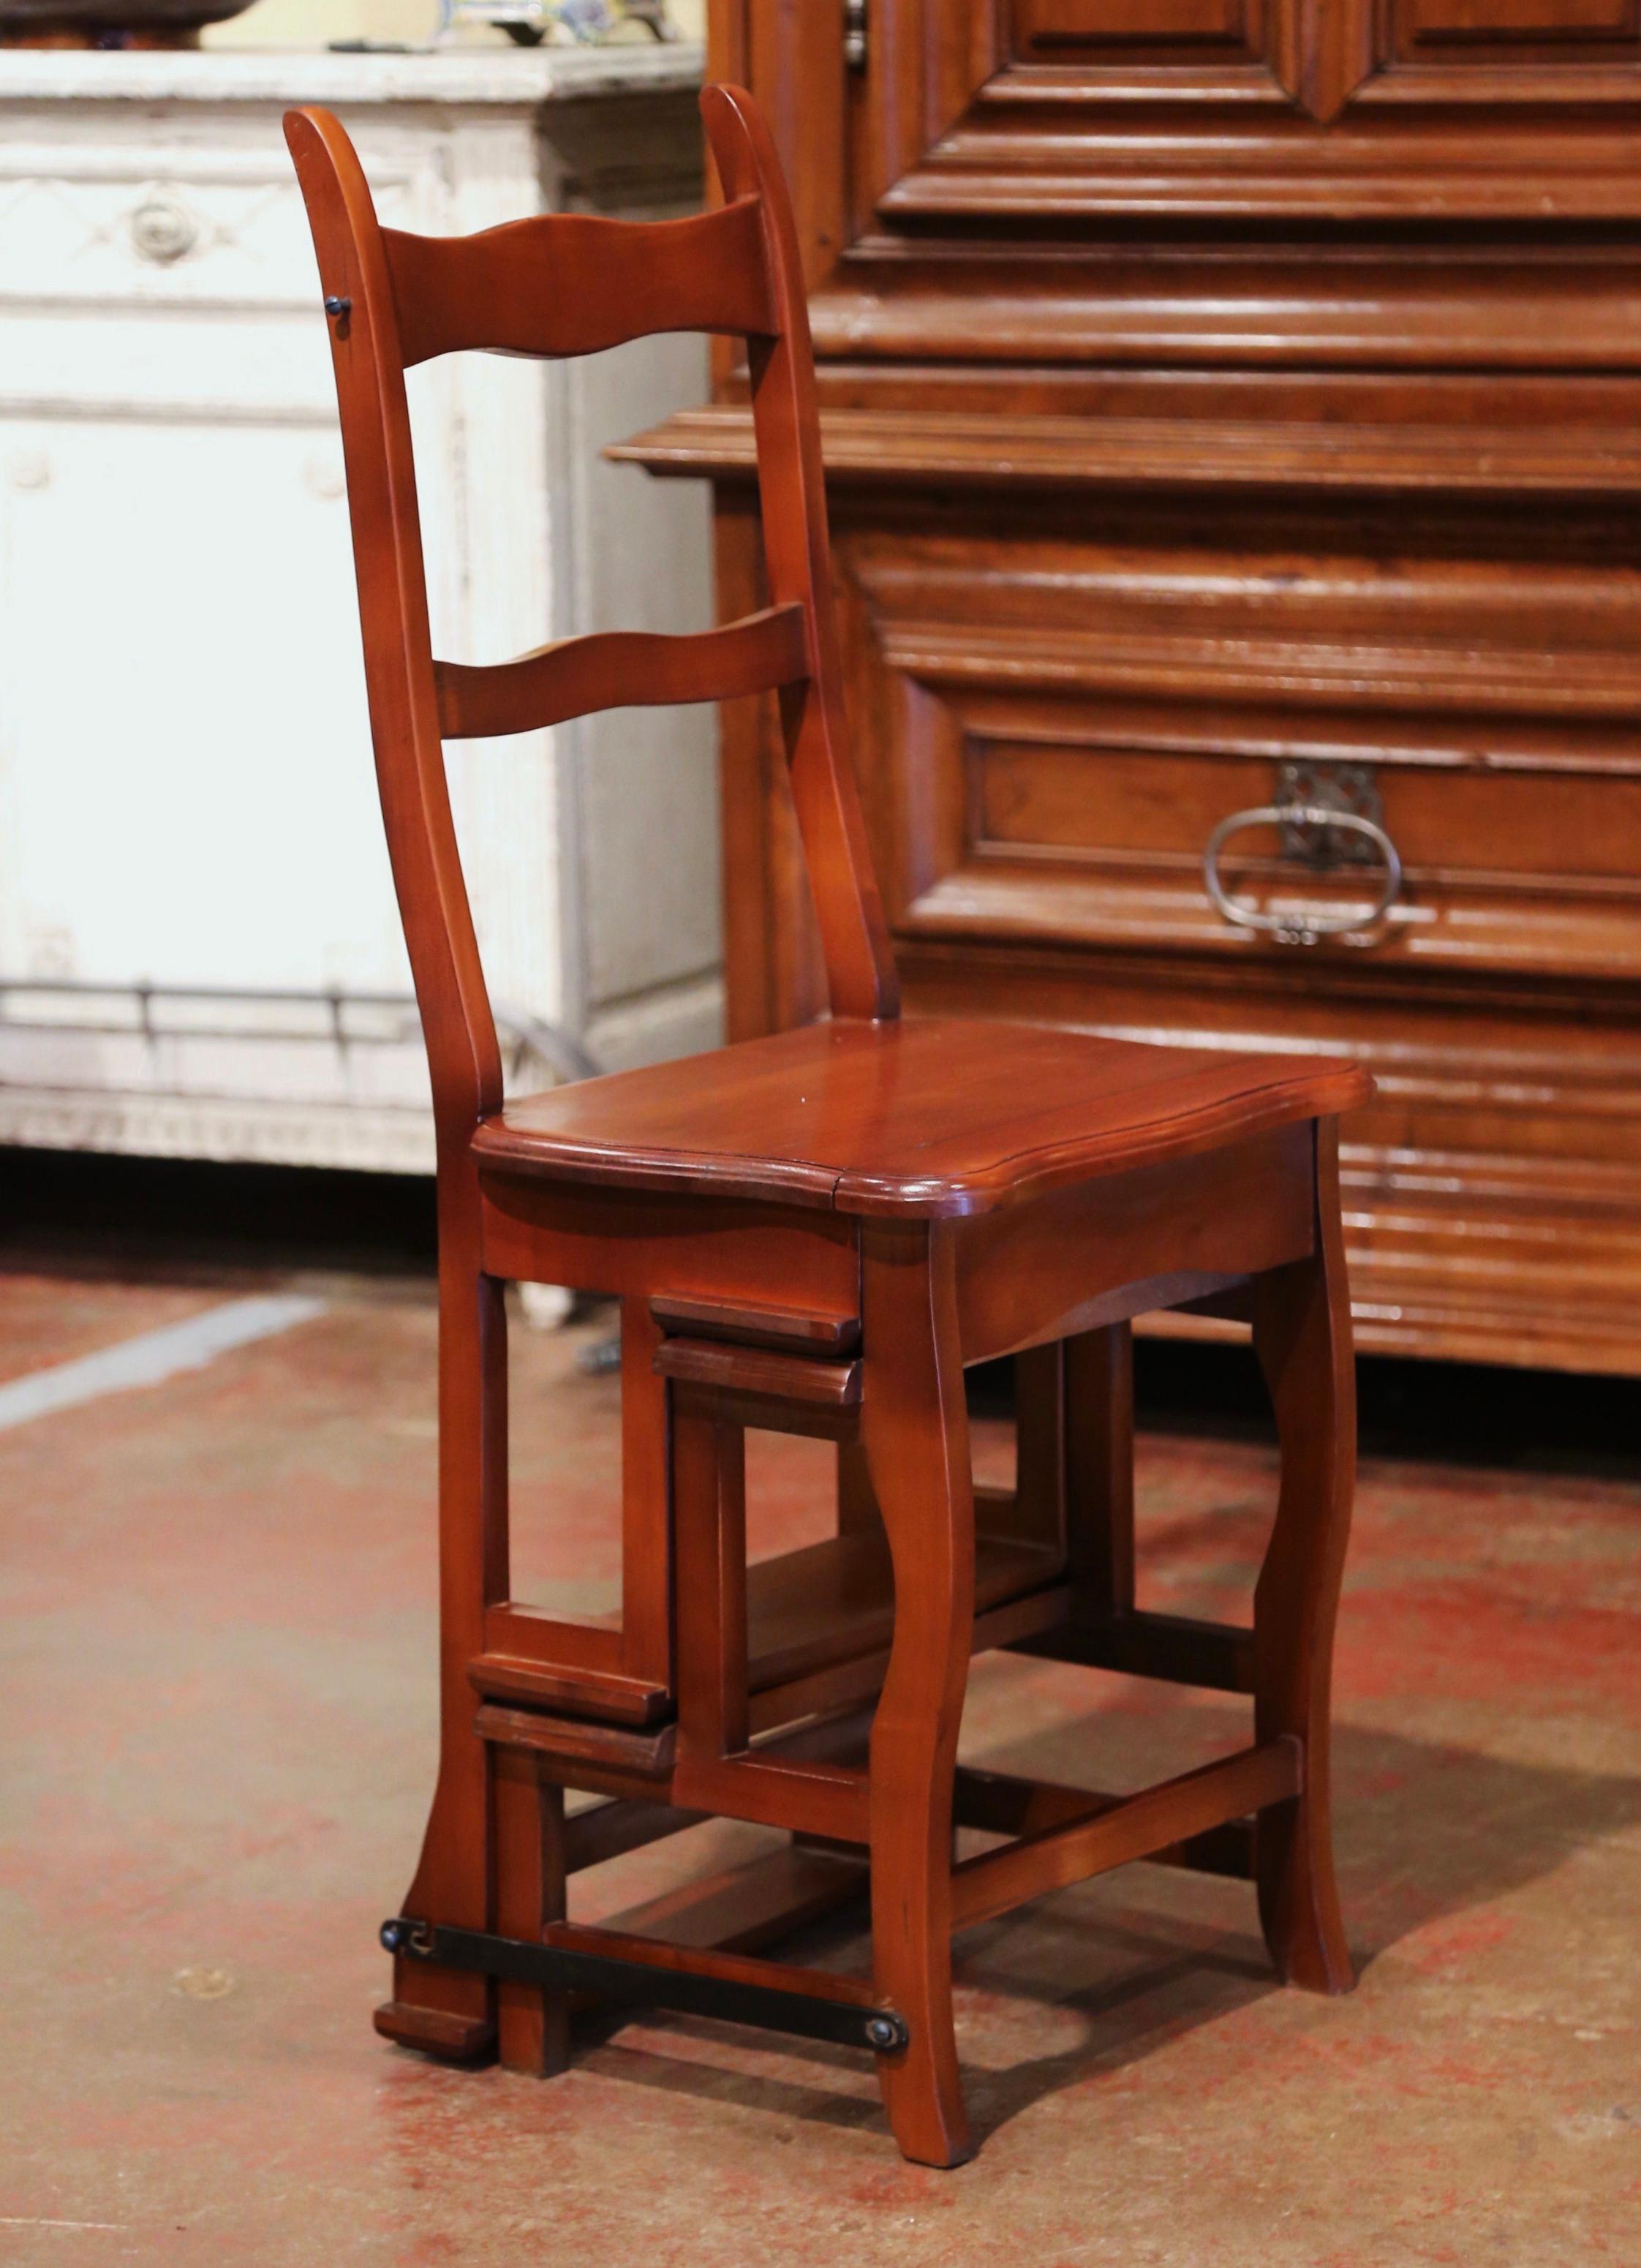 Decorate a library or study with this artisan-made folding step ladder chair. Crafted in Southern France circa 1960, the metamorphic chair features two carved ladders in the back; the double-function piece is hinged so that it can convert into a